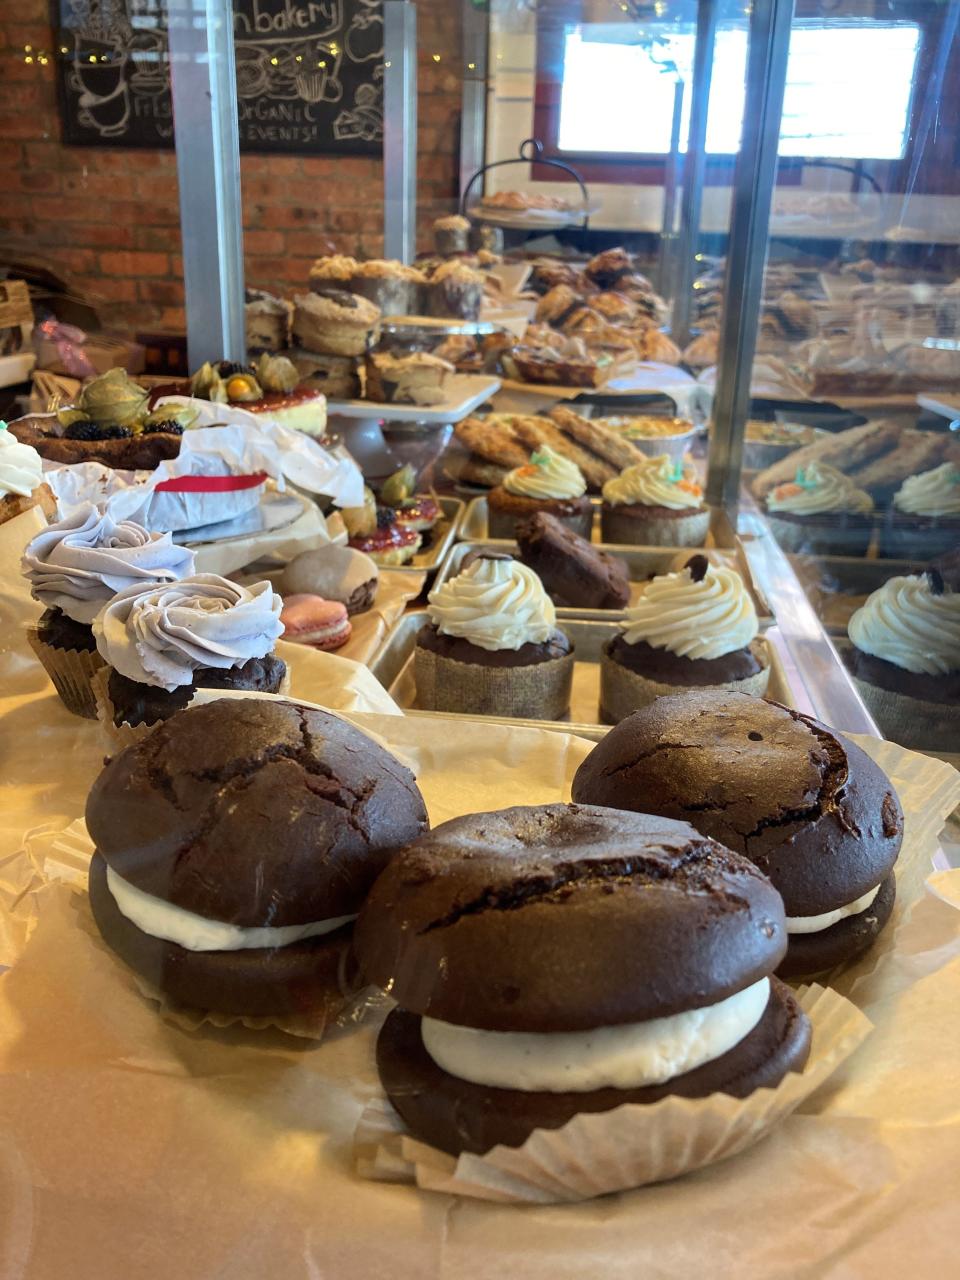 Red Barn Bakery in Irvington features a host of gluten-free baked goods.